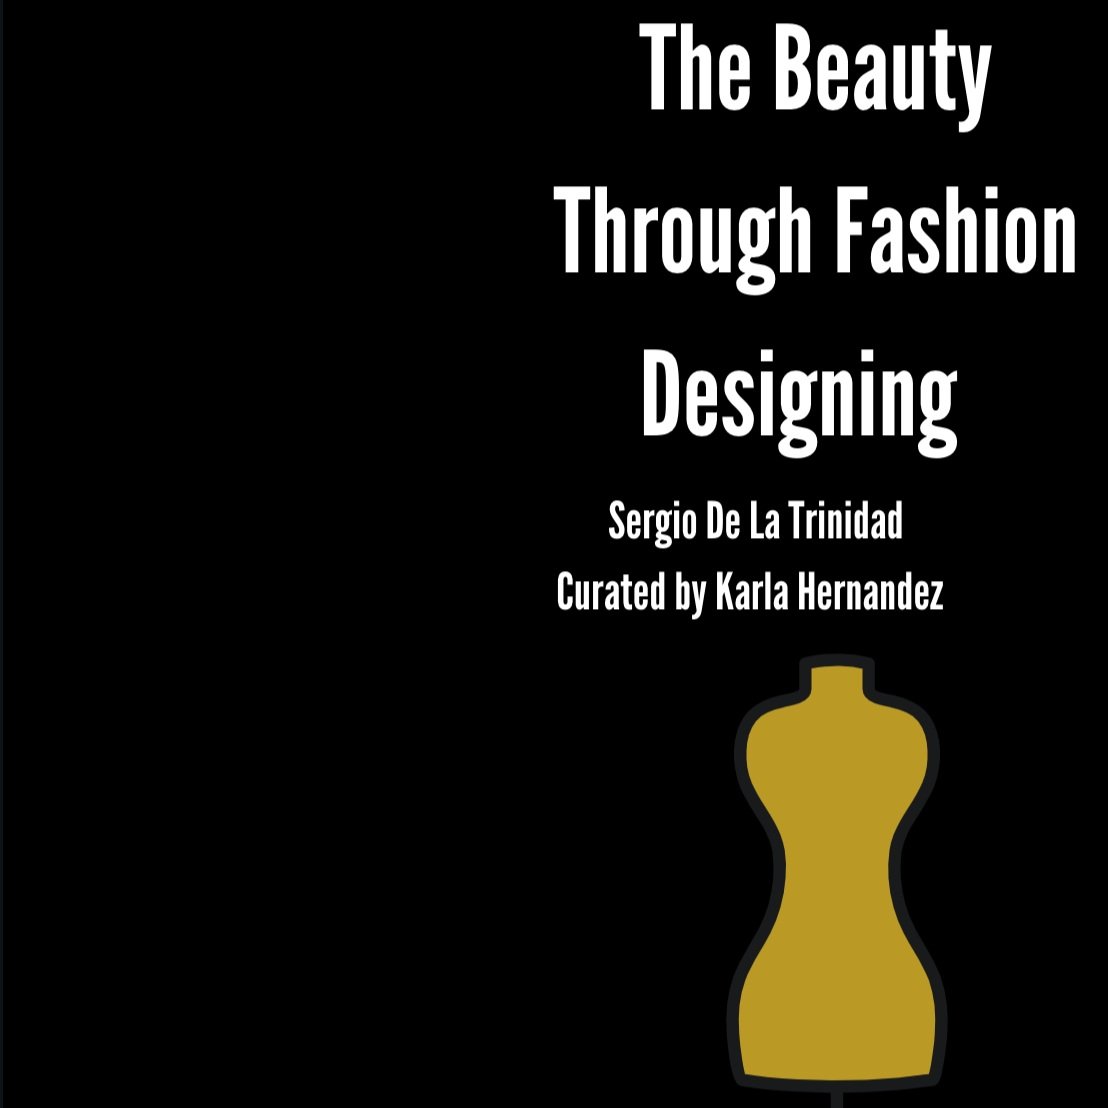 The Beauty Through Fashion Designing